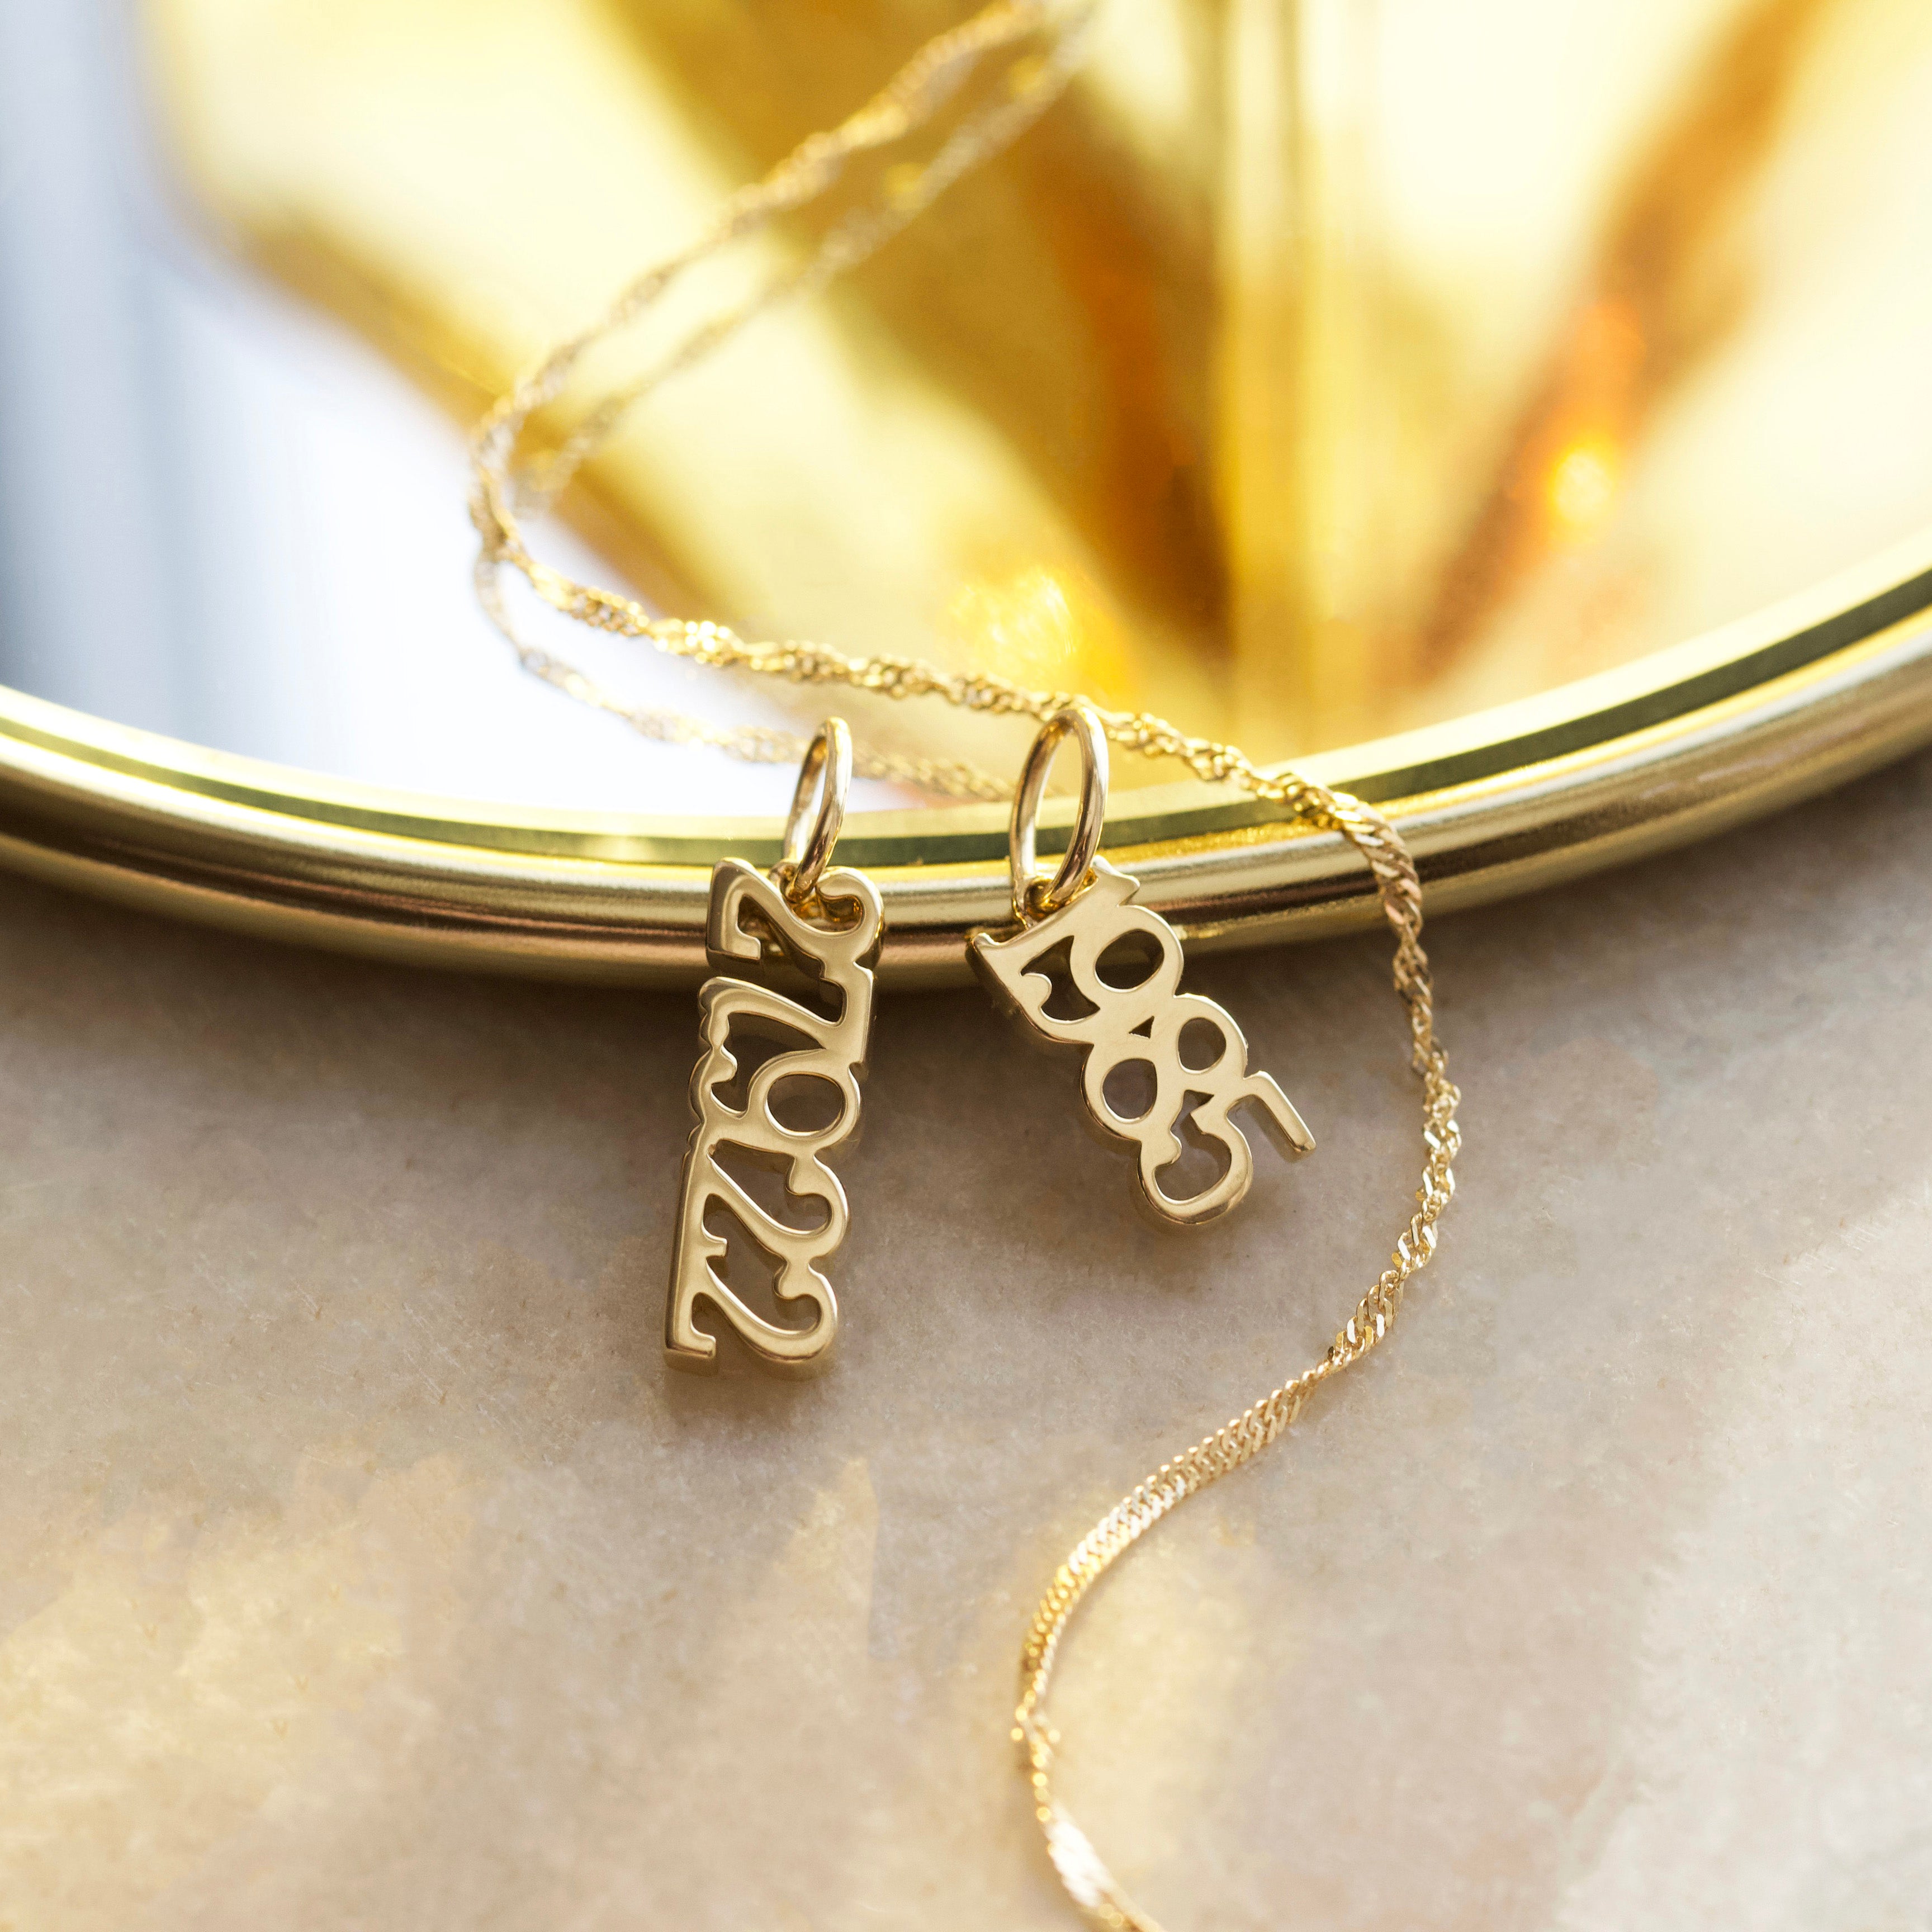 year charm solid 9k gold